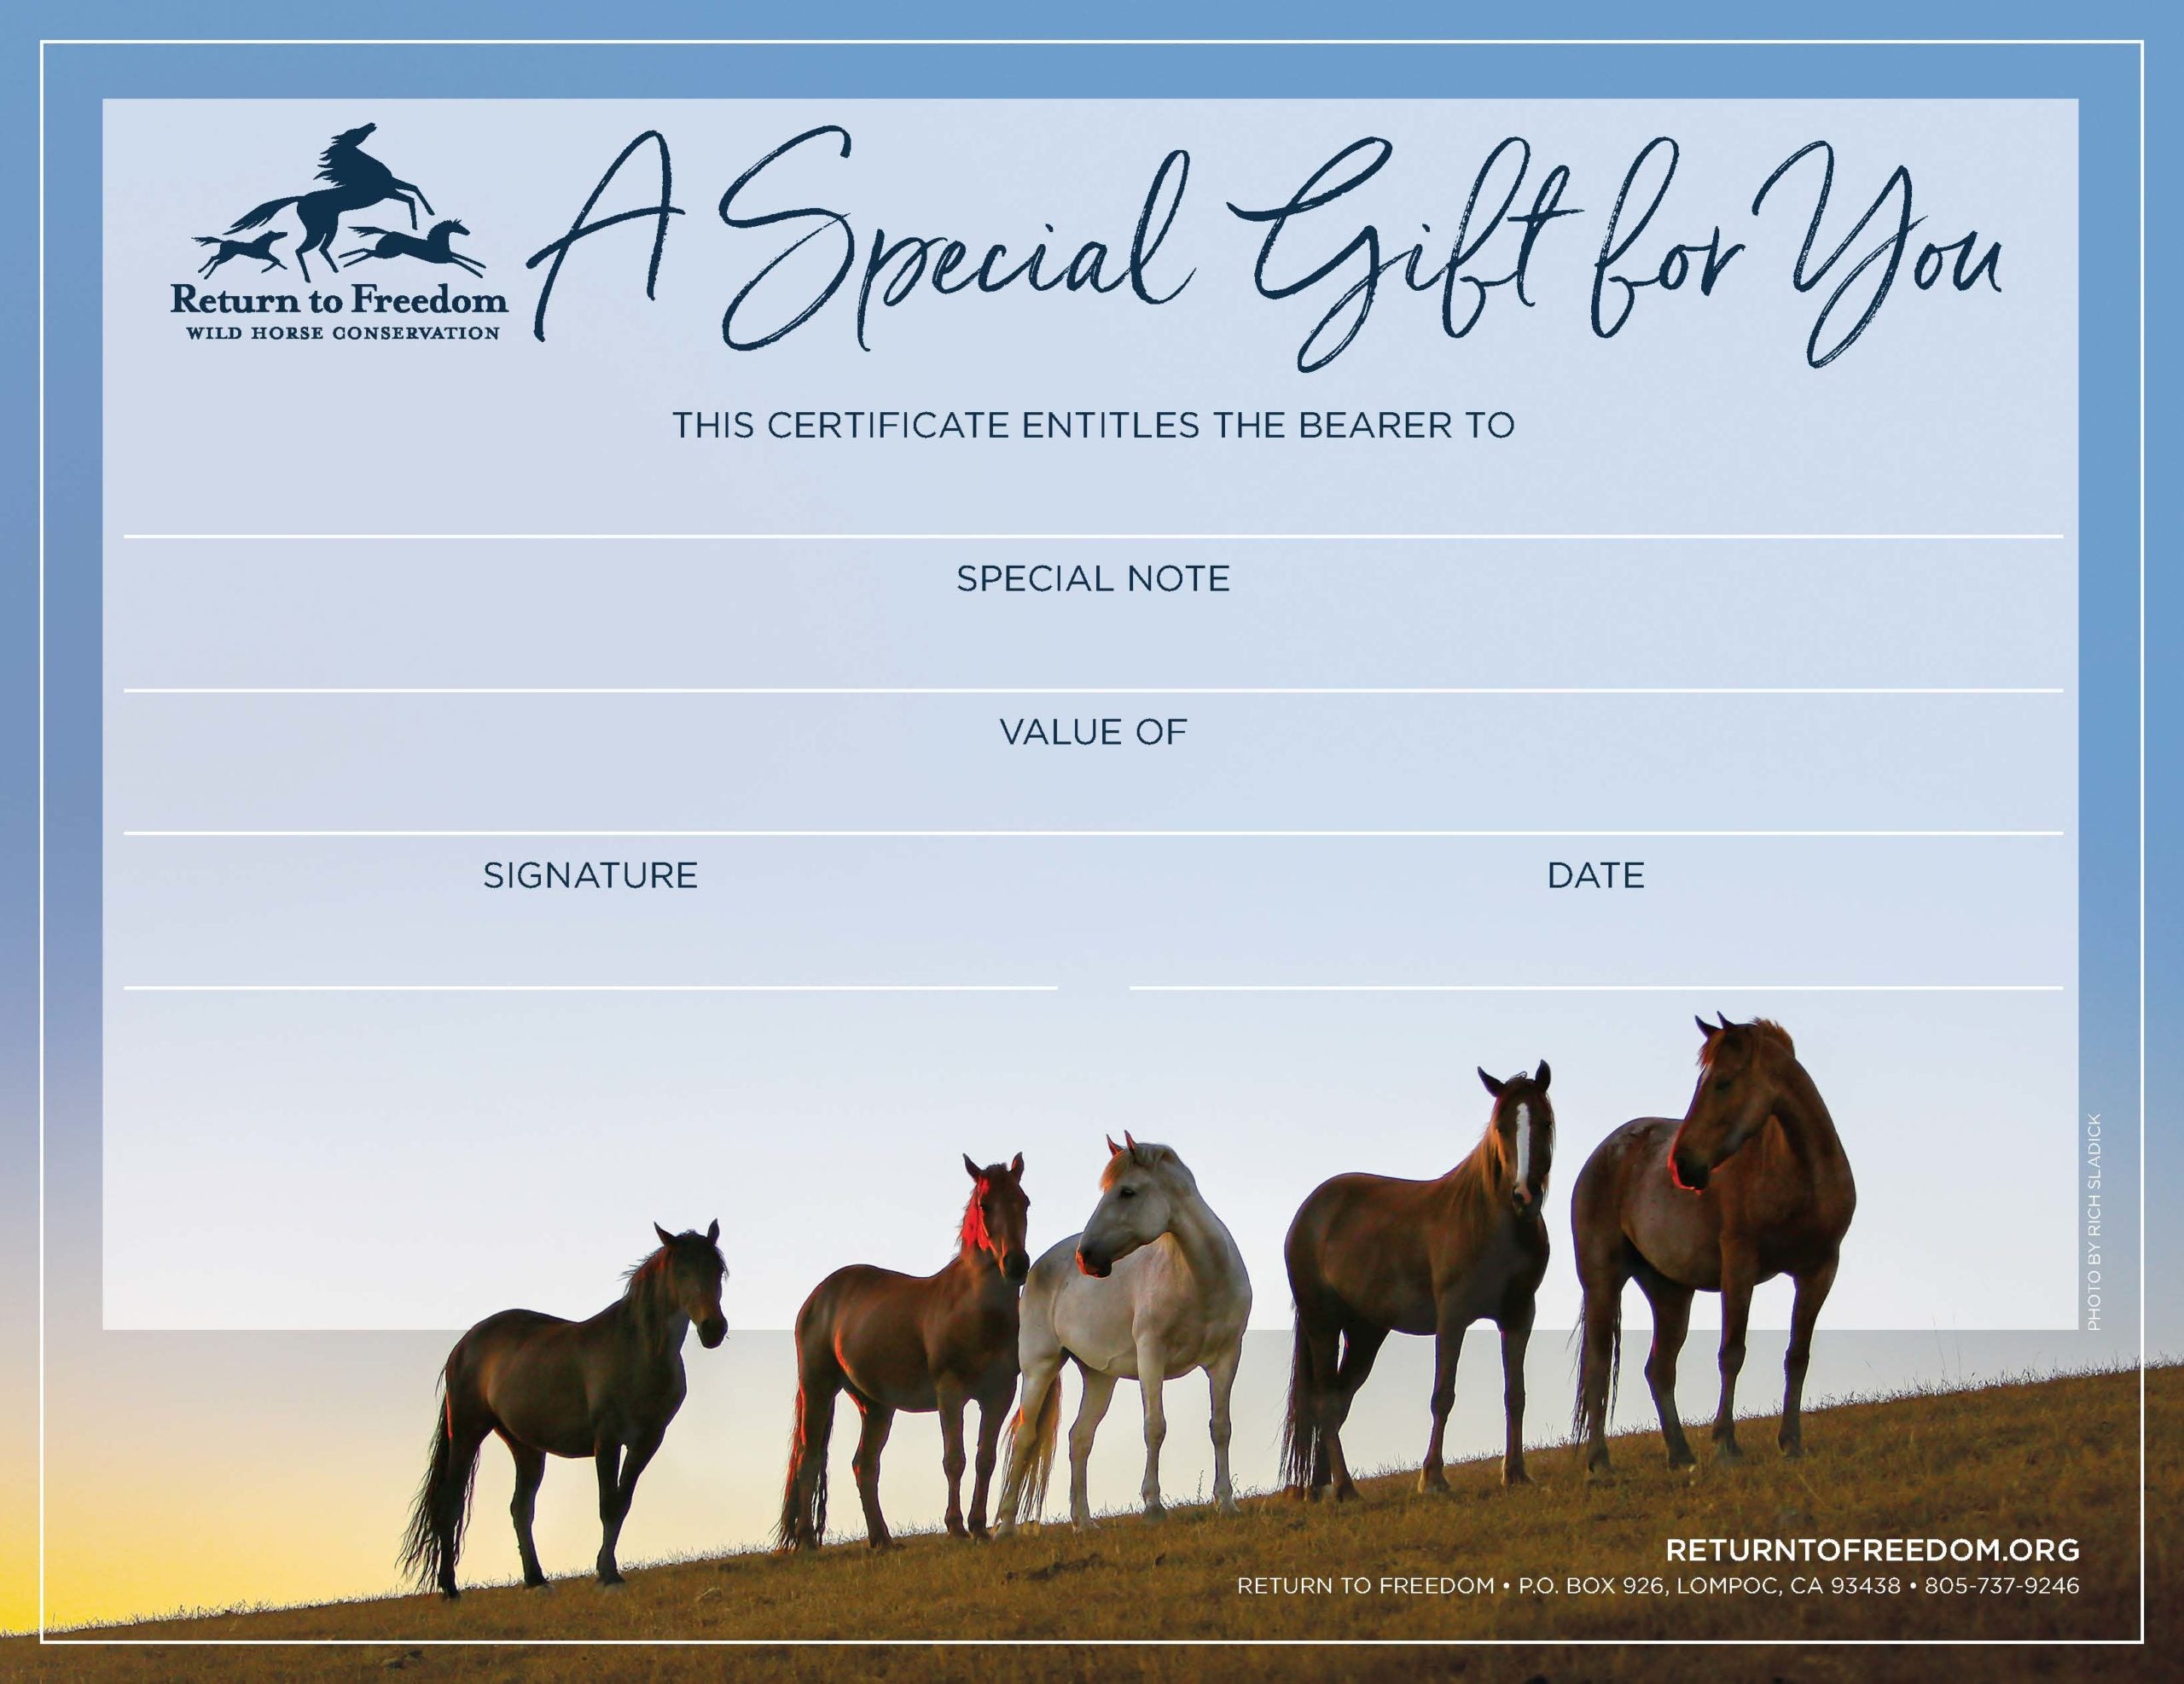 Return to Freedom Gift Certificate